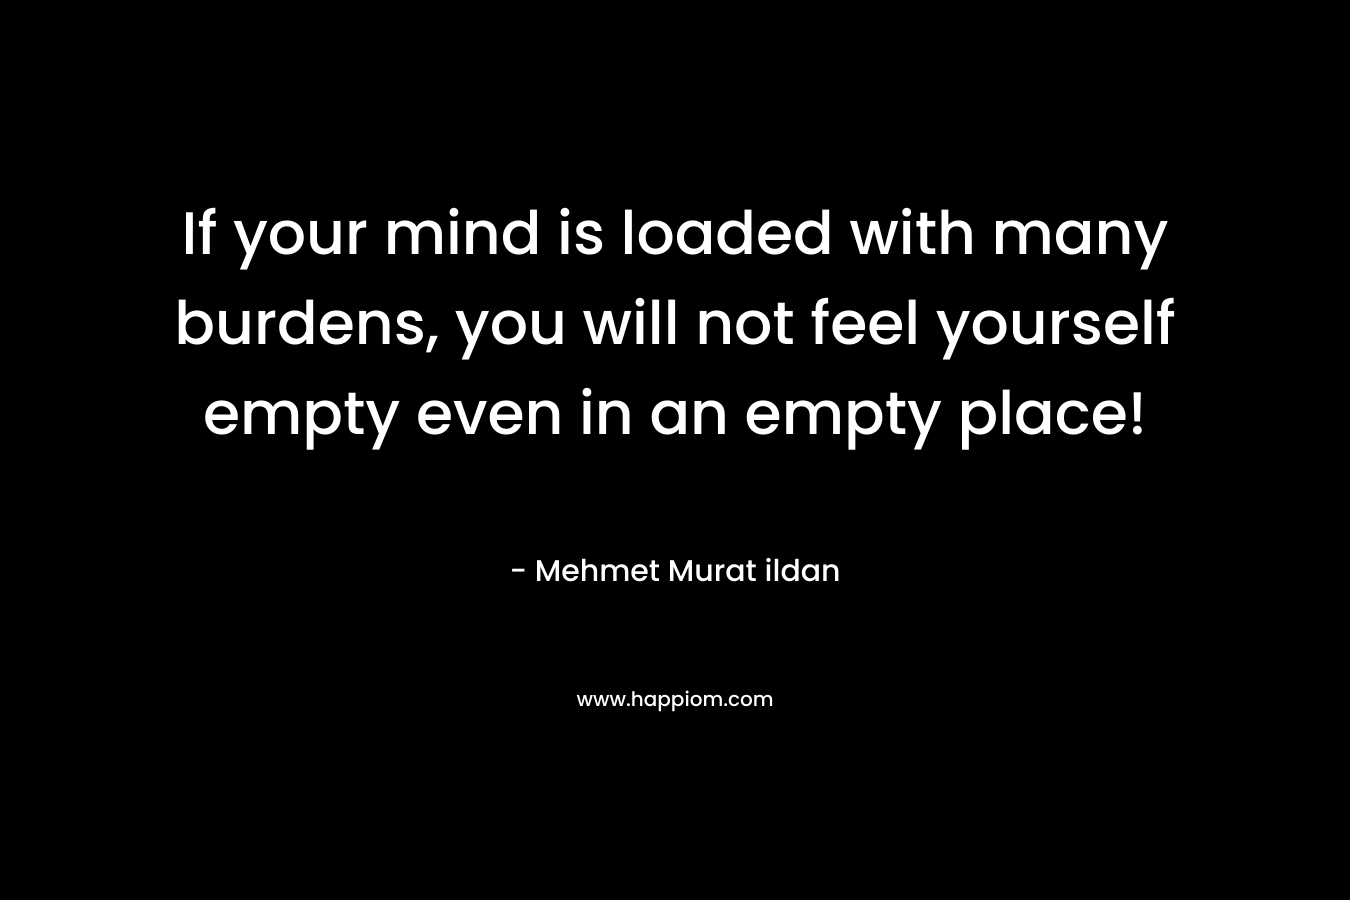 If your mind is loaded with many burdens, you will not feel yourself empty even in an empty place!